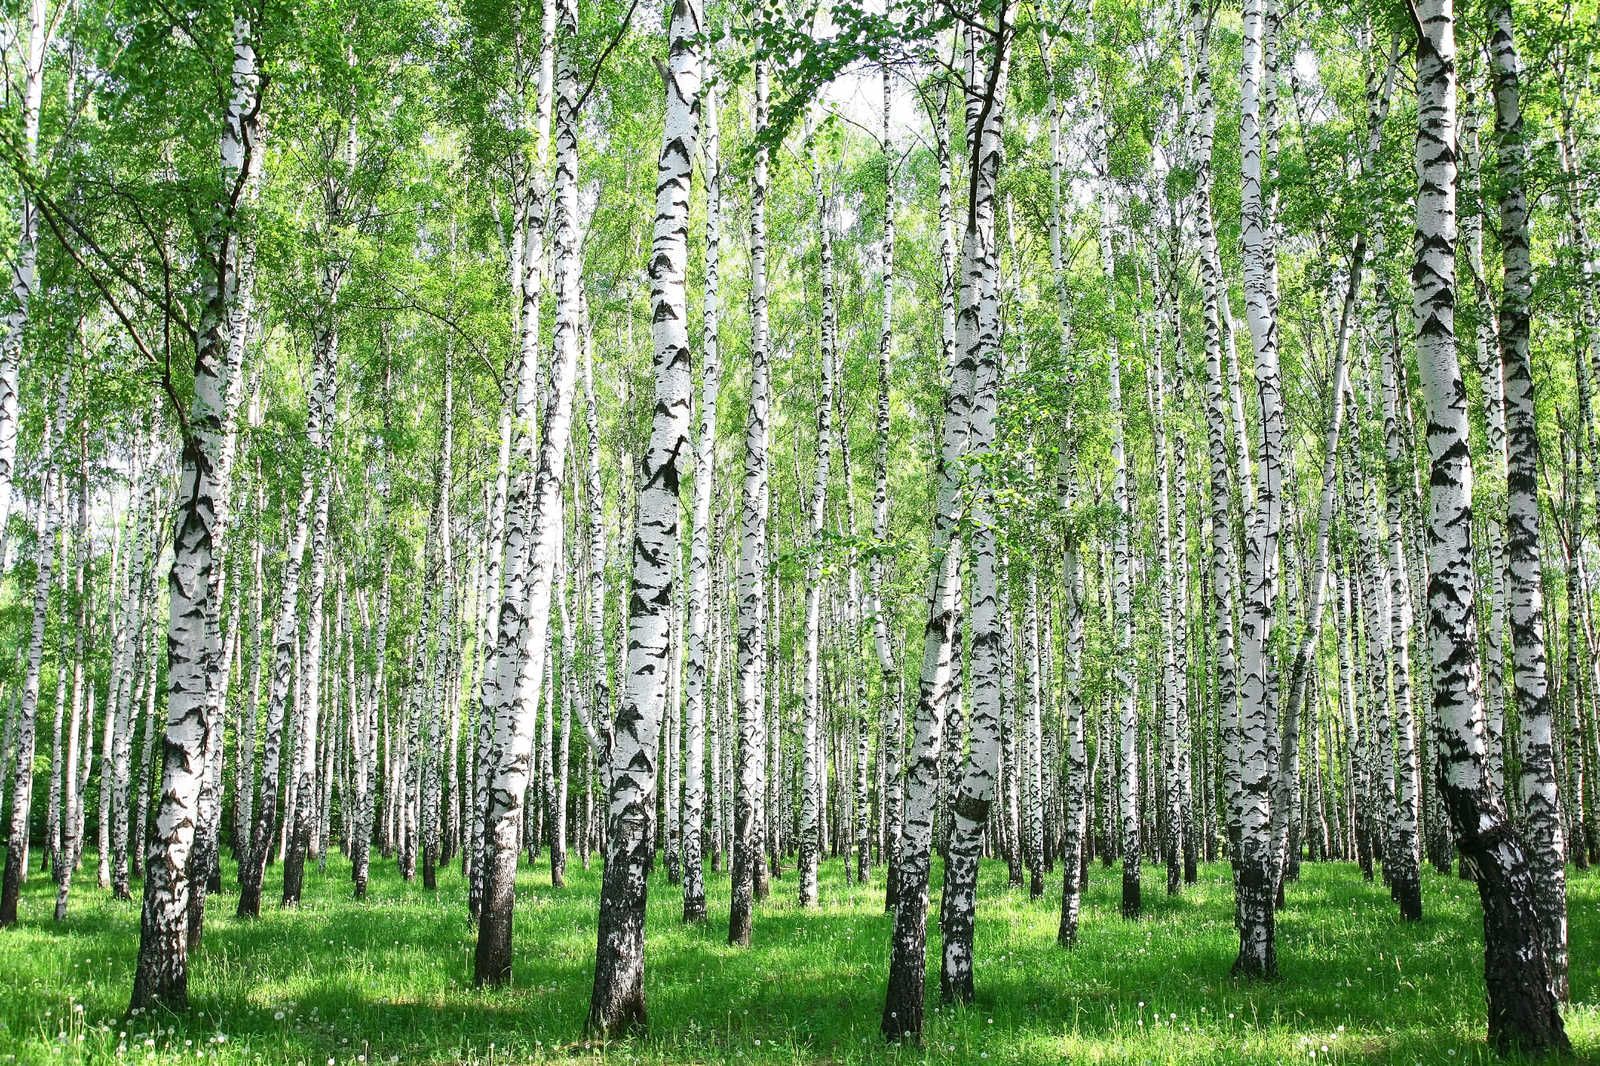             Canvas painting Landscape Birch Forest by Day - 0,90 m x 0,60 m
        